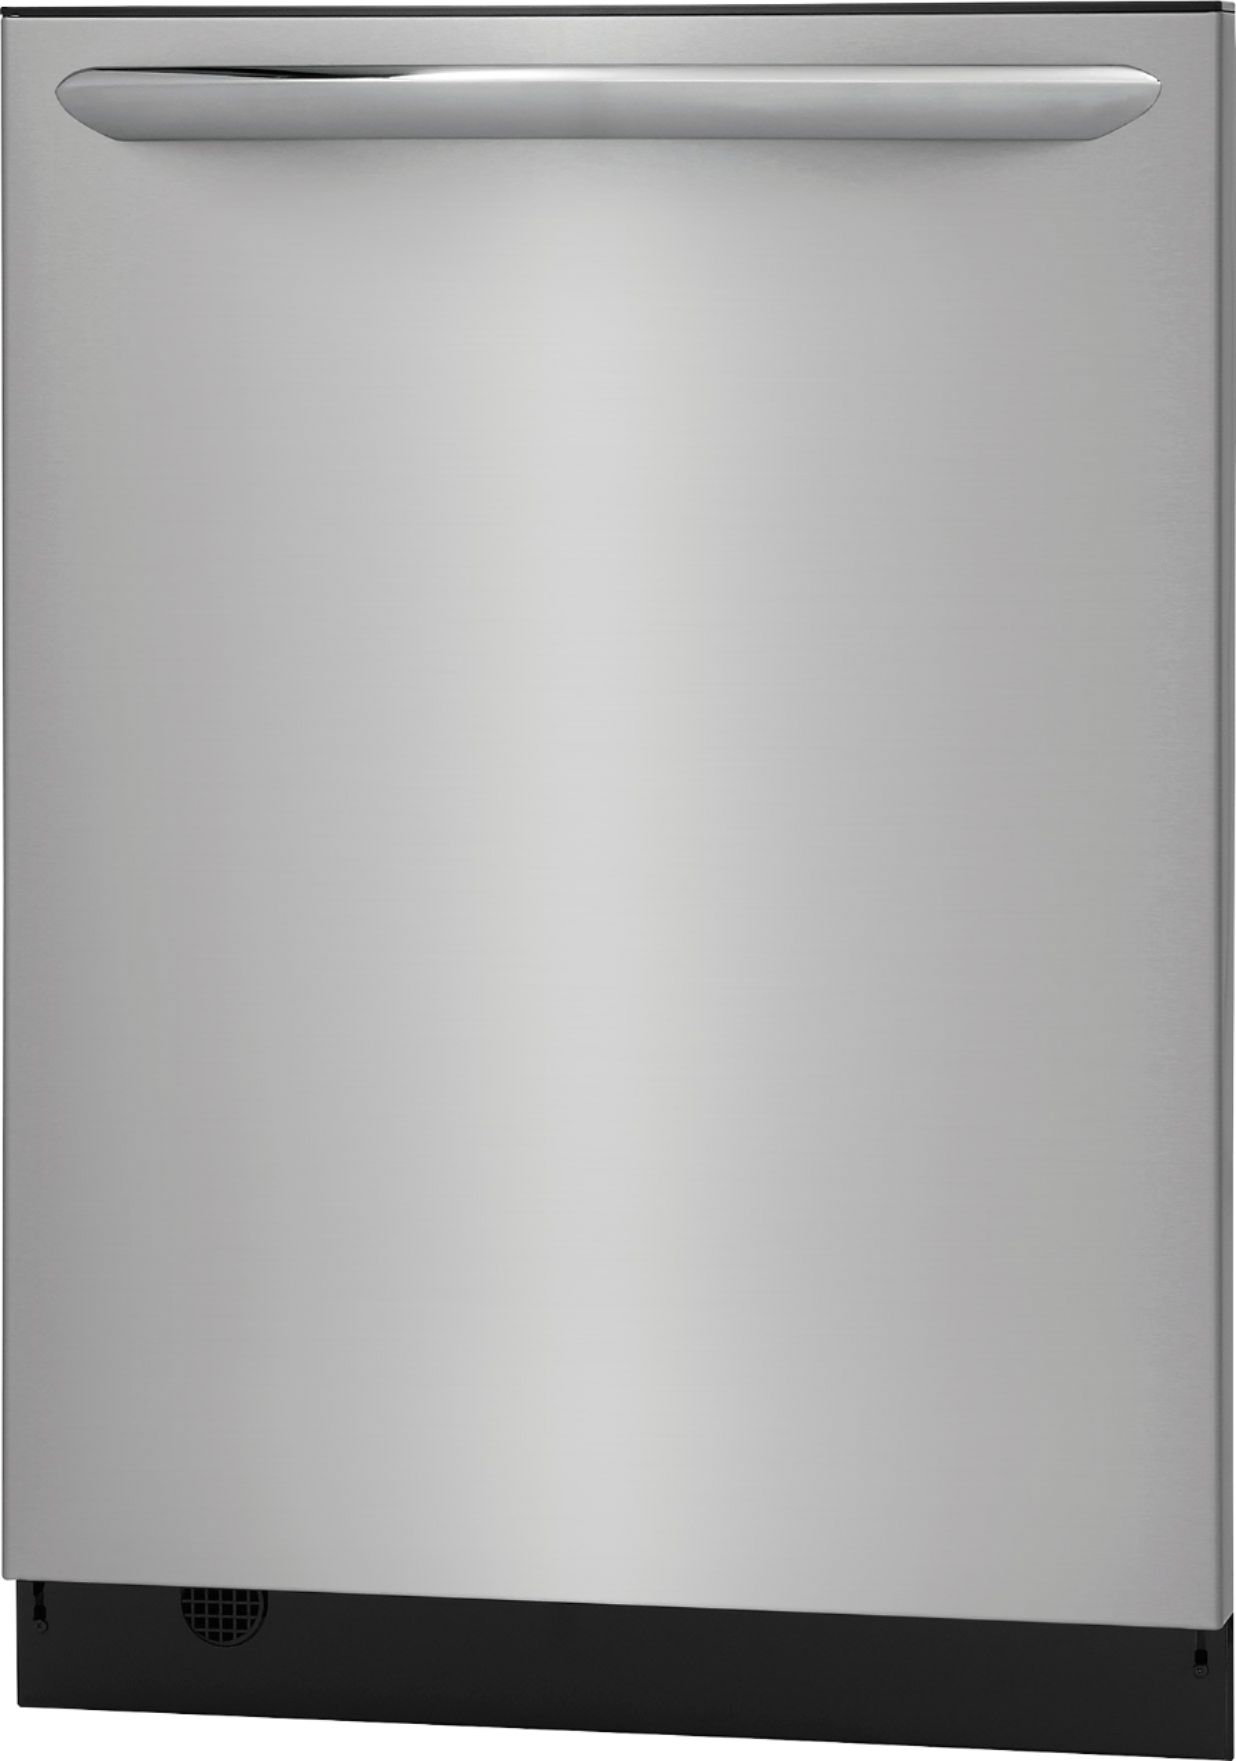 Left View: Whirlpool - 24" Built-In Dishwasher